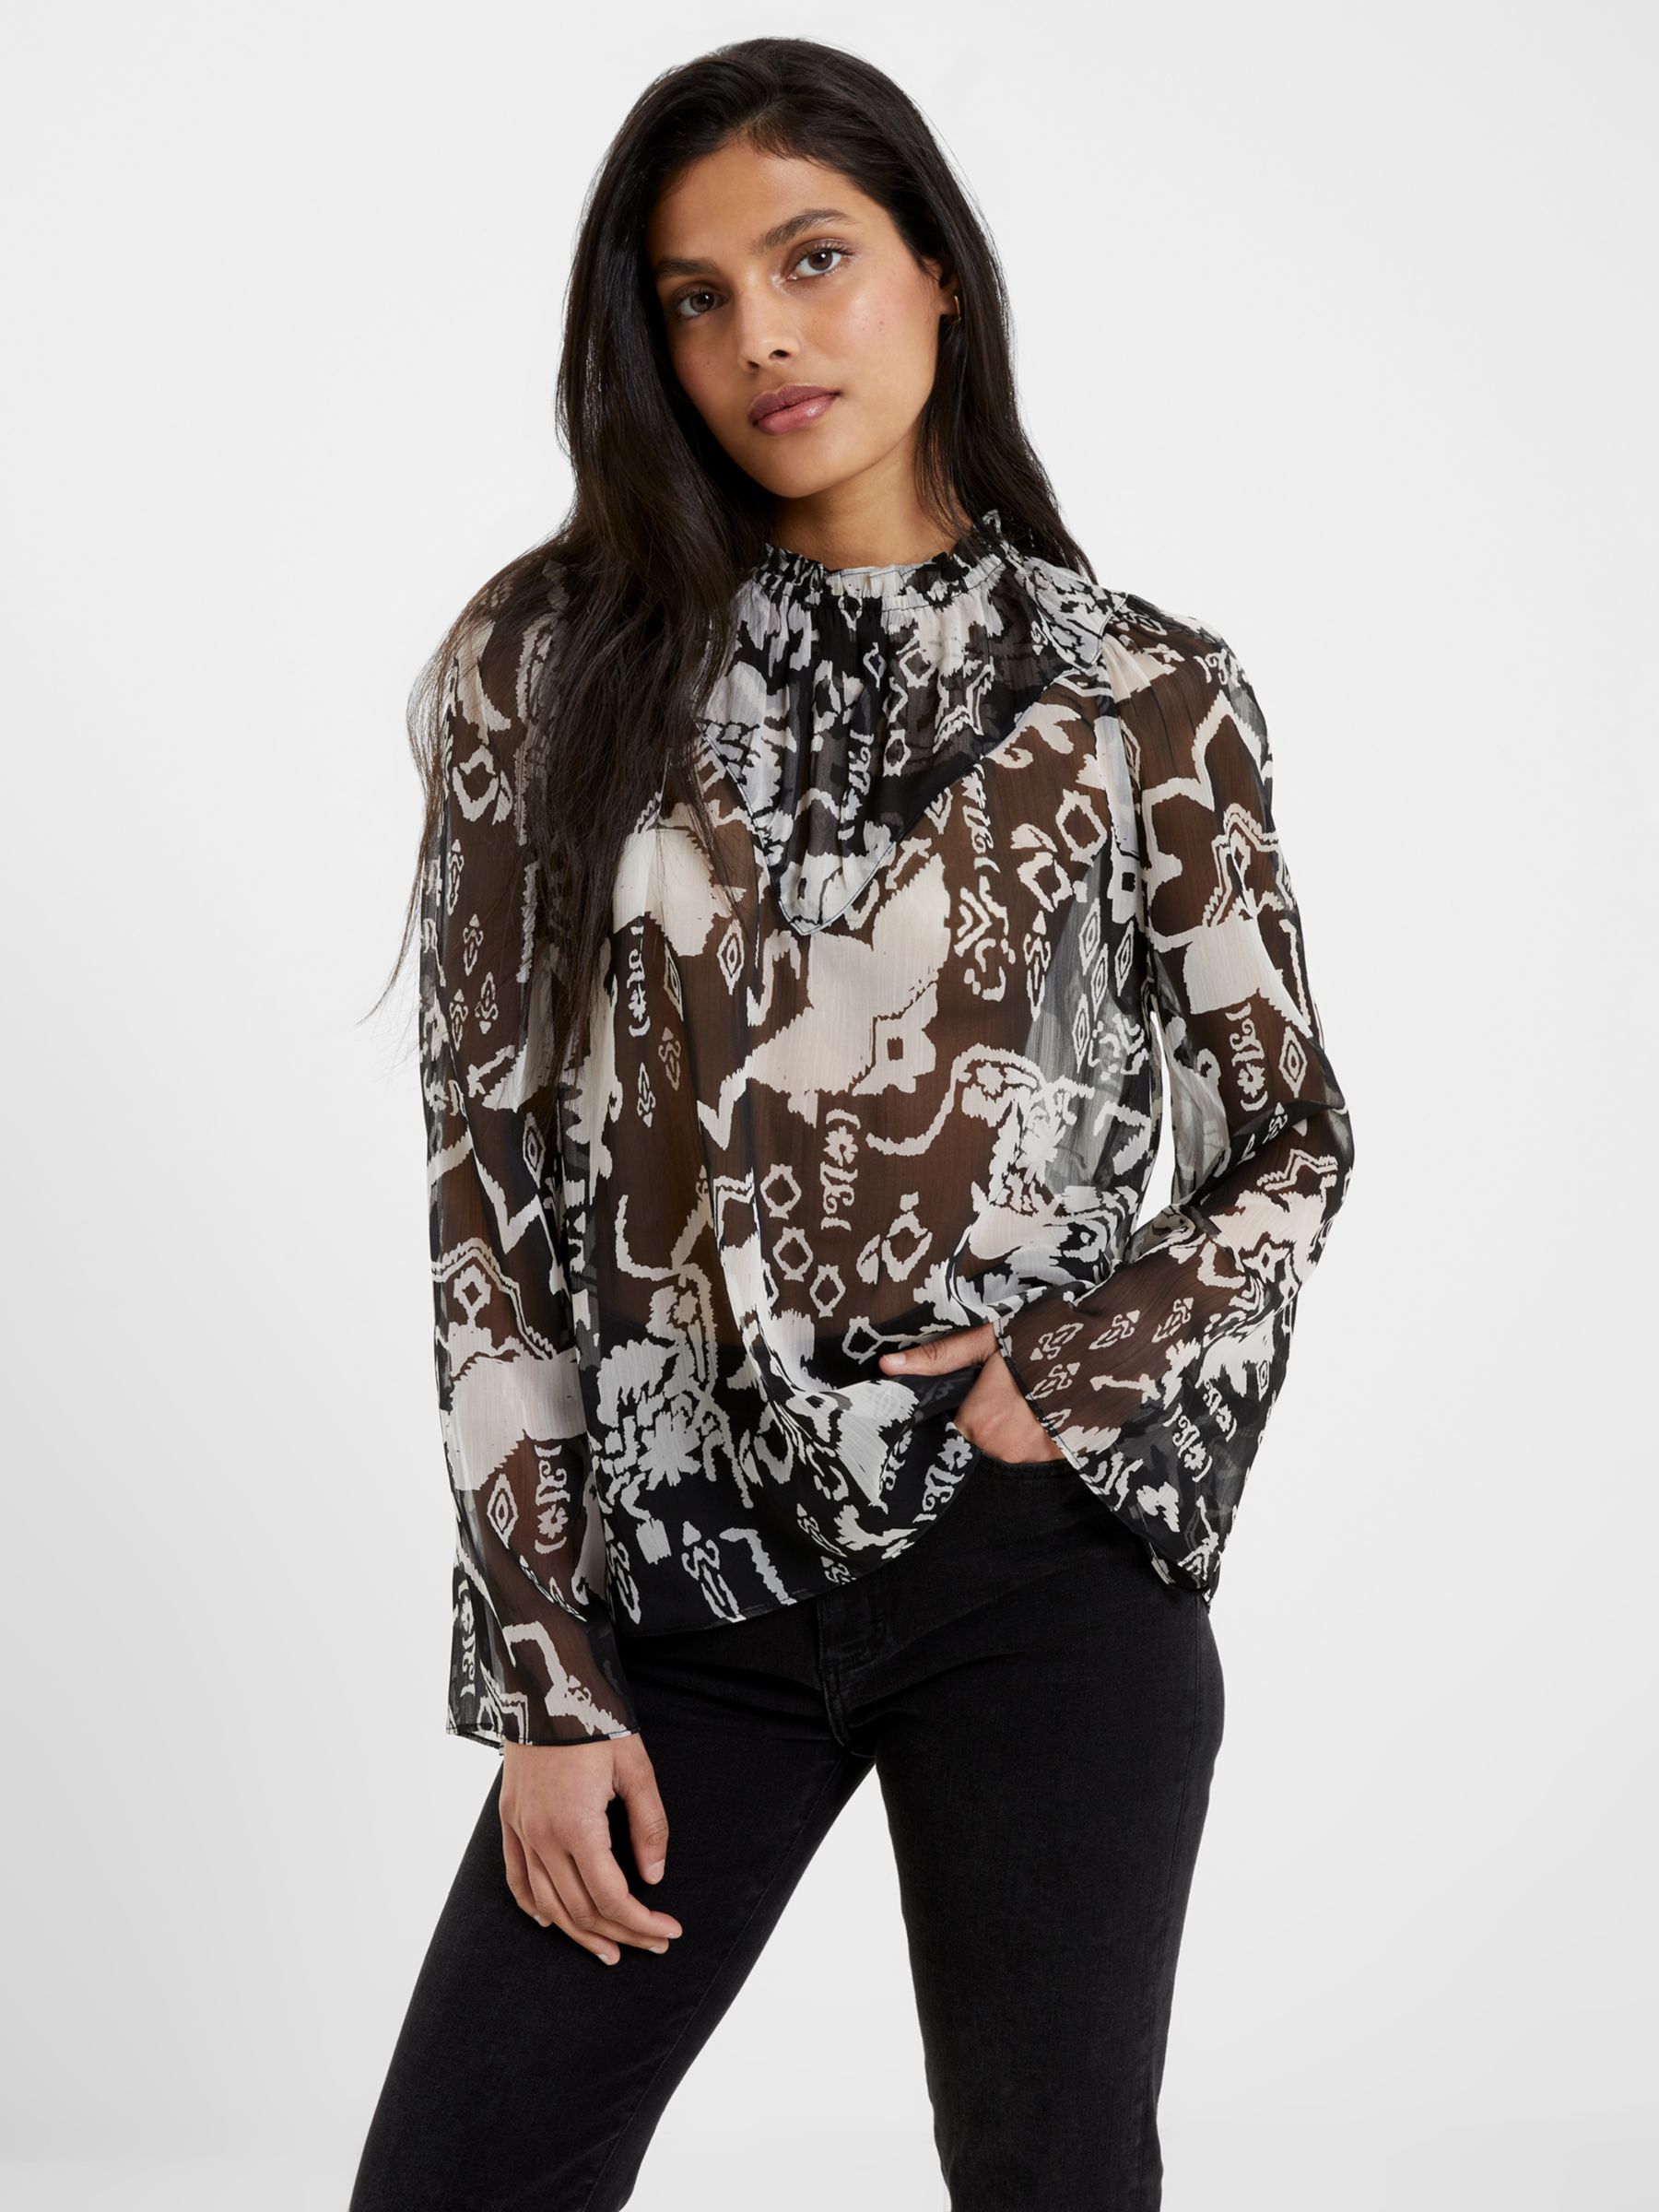 French Connection Deon Hallie High Neck Top, Black/Cream at John Lewis ...